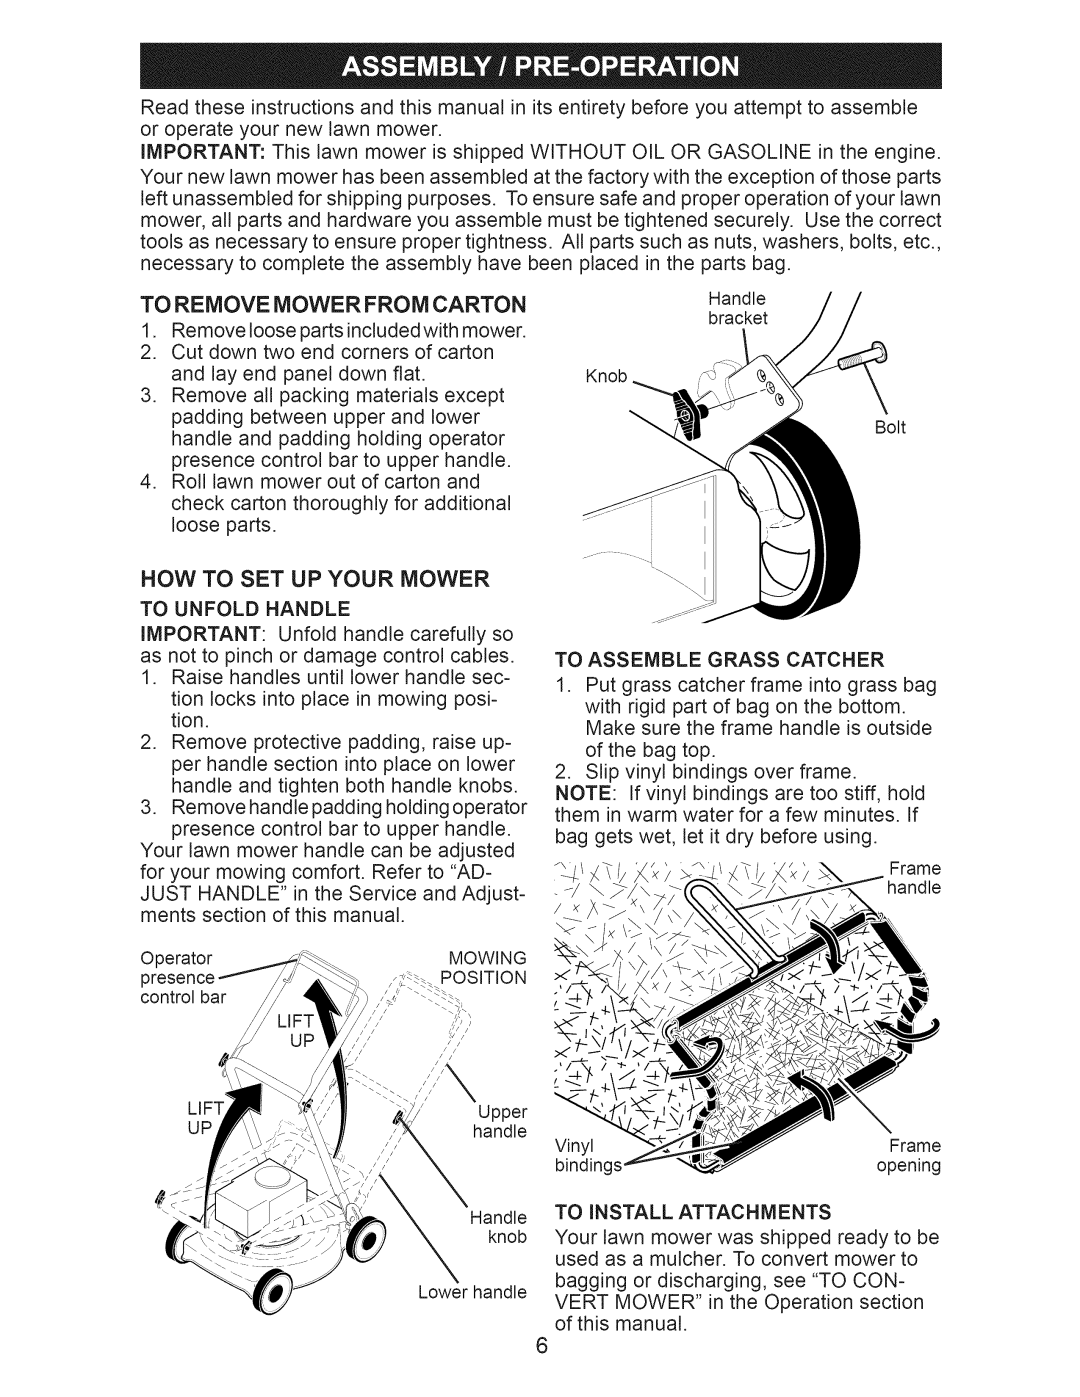 Craftsman 917.374354 owner manual To Remove Mower From Carton, Now To Set Up Your Mower 